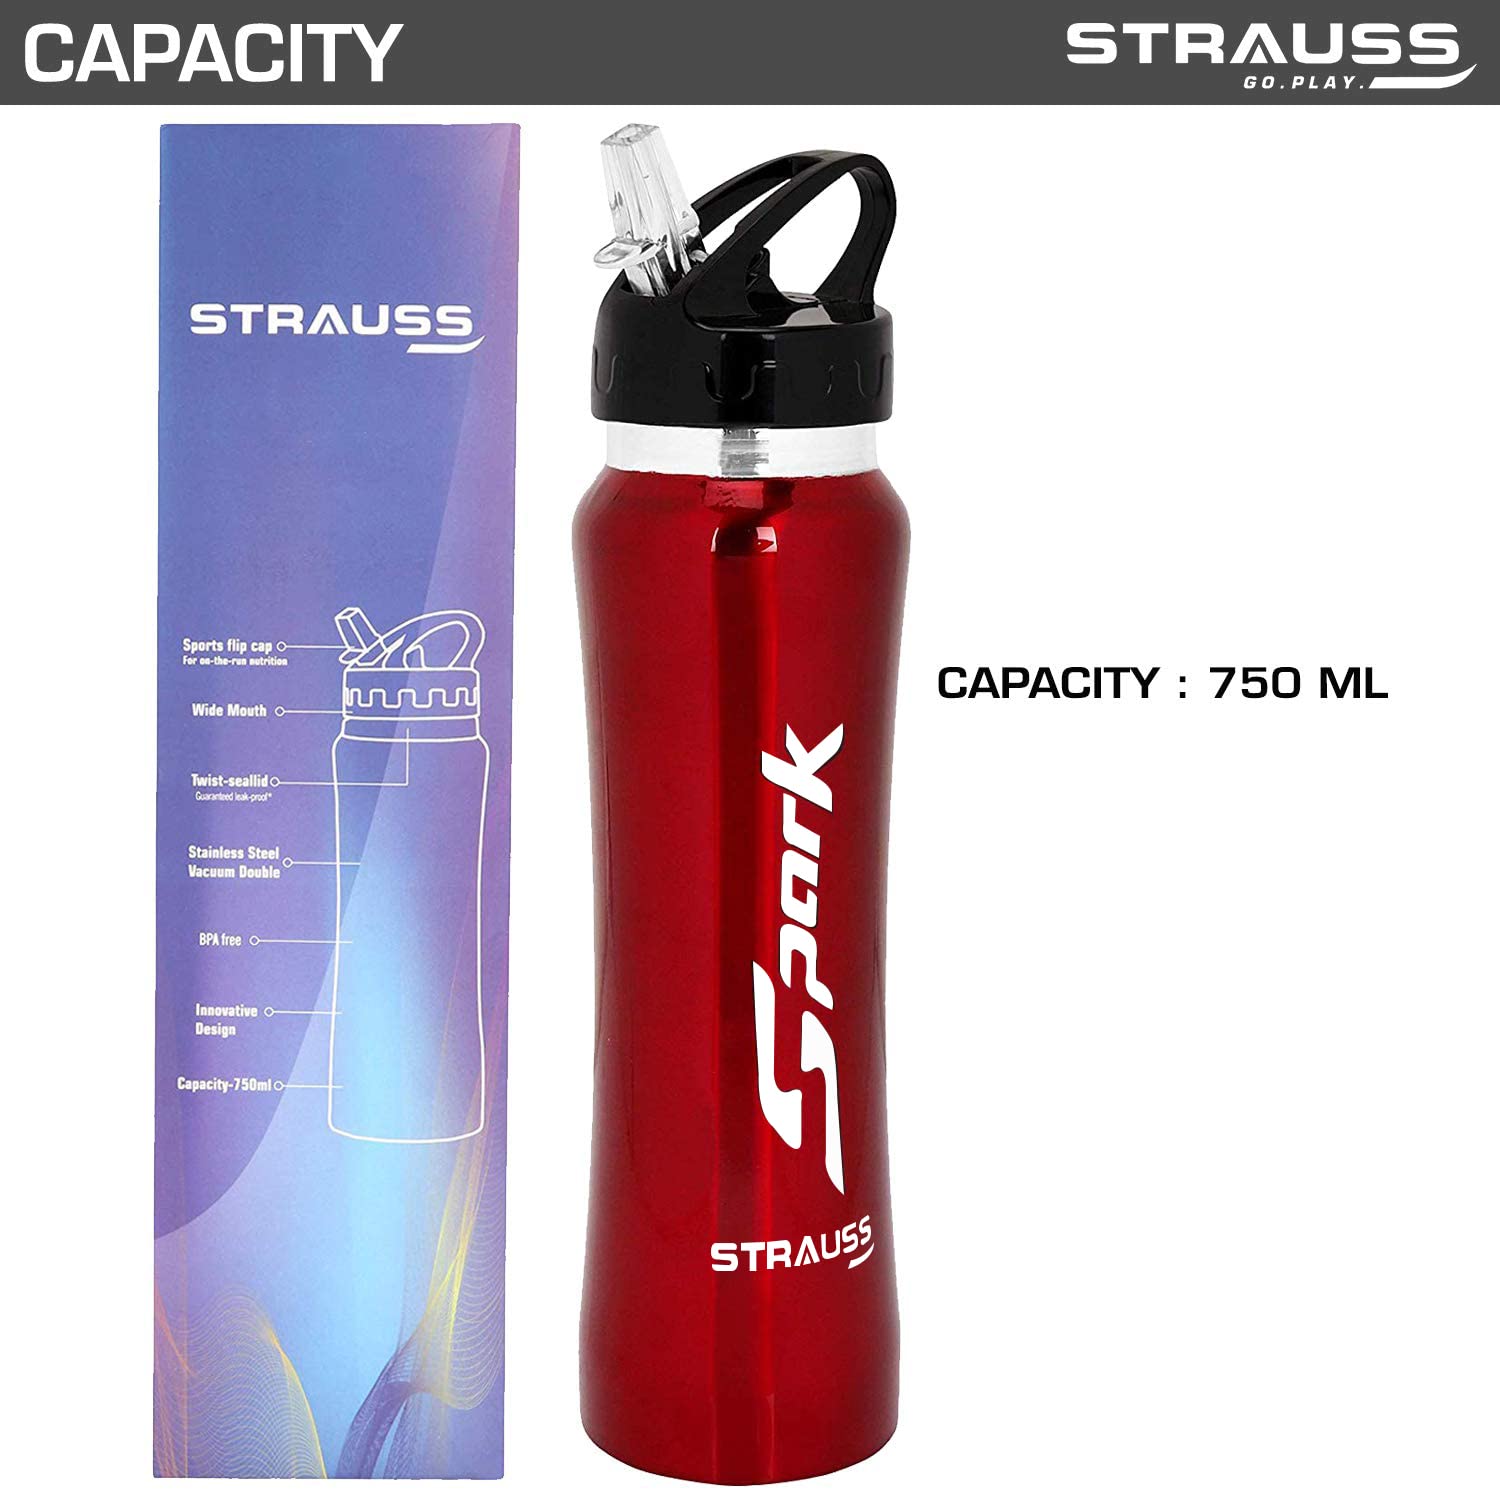 STRAUSS Spark Stainless-Steel Bottle, Metal Finish, 750 ml, (Red)